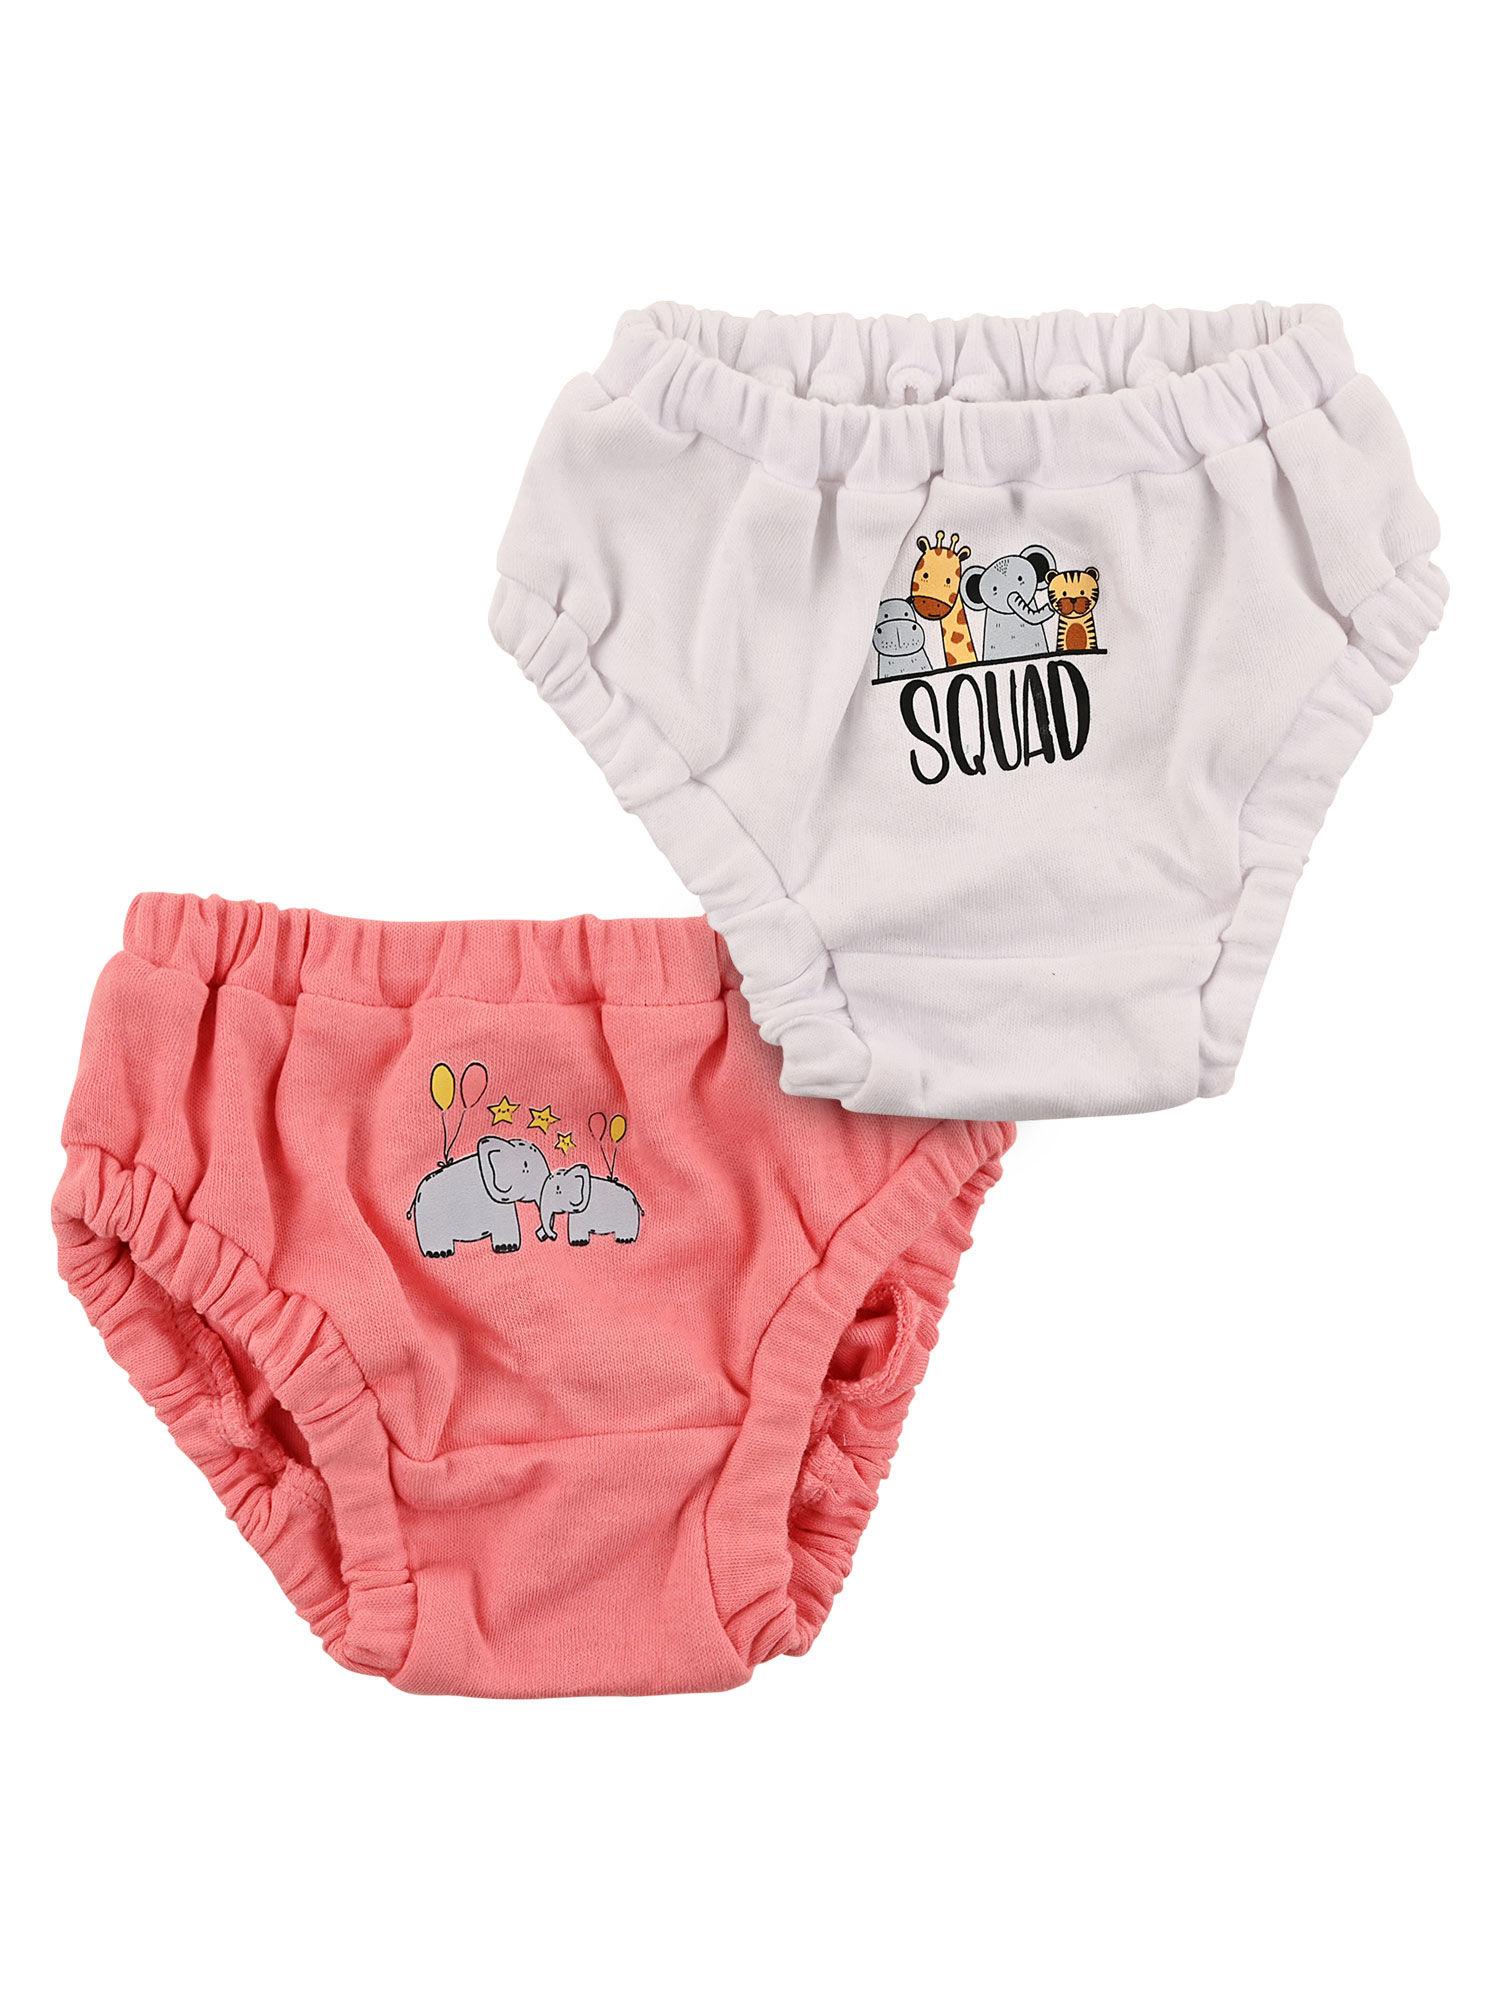 baby girls printed bloomer brief underwear pink and white (pack of 2)